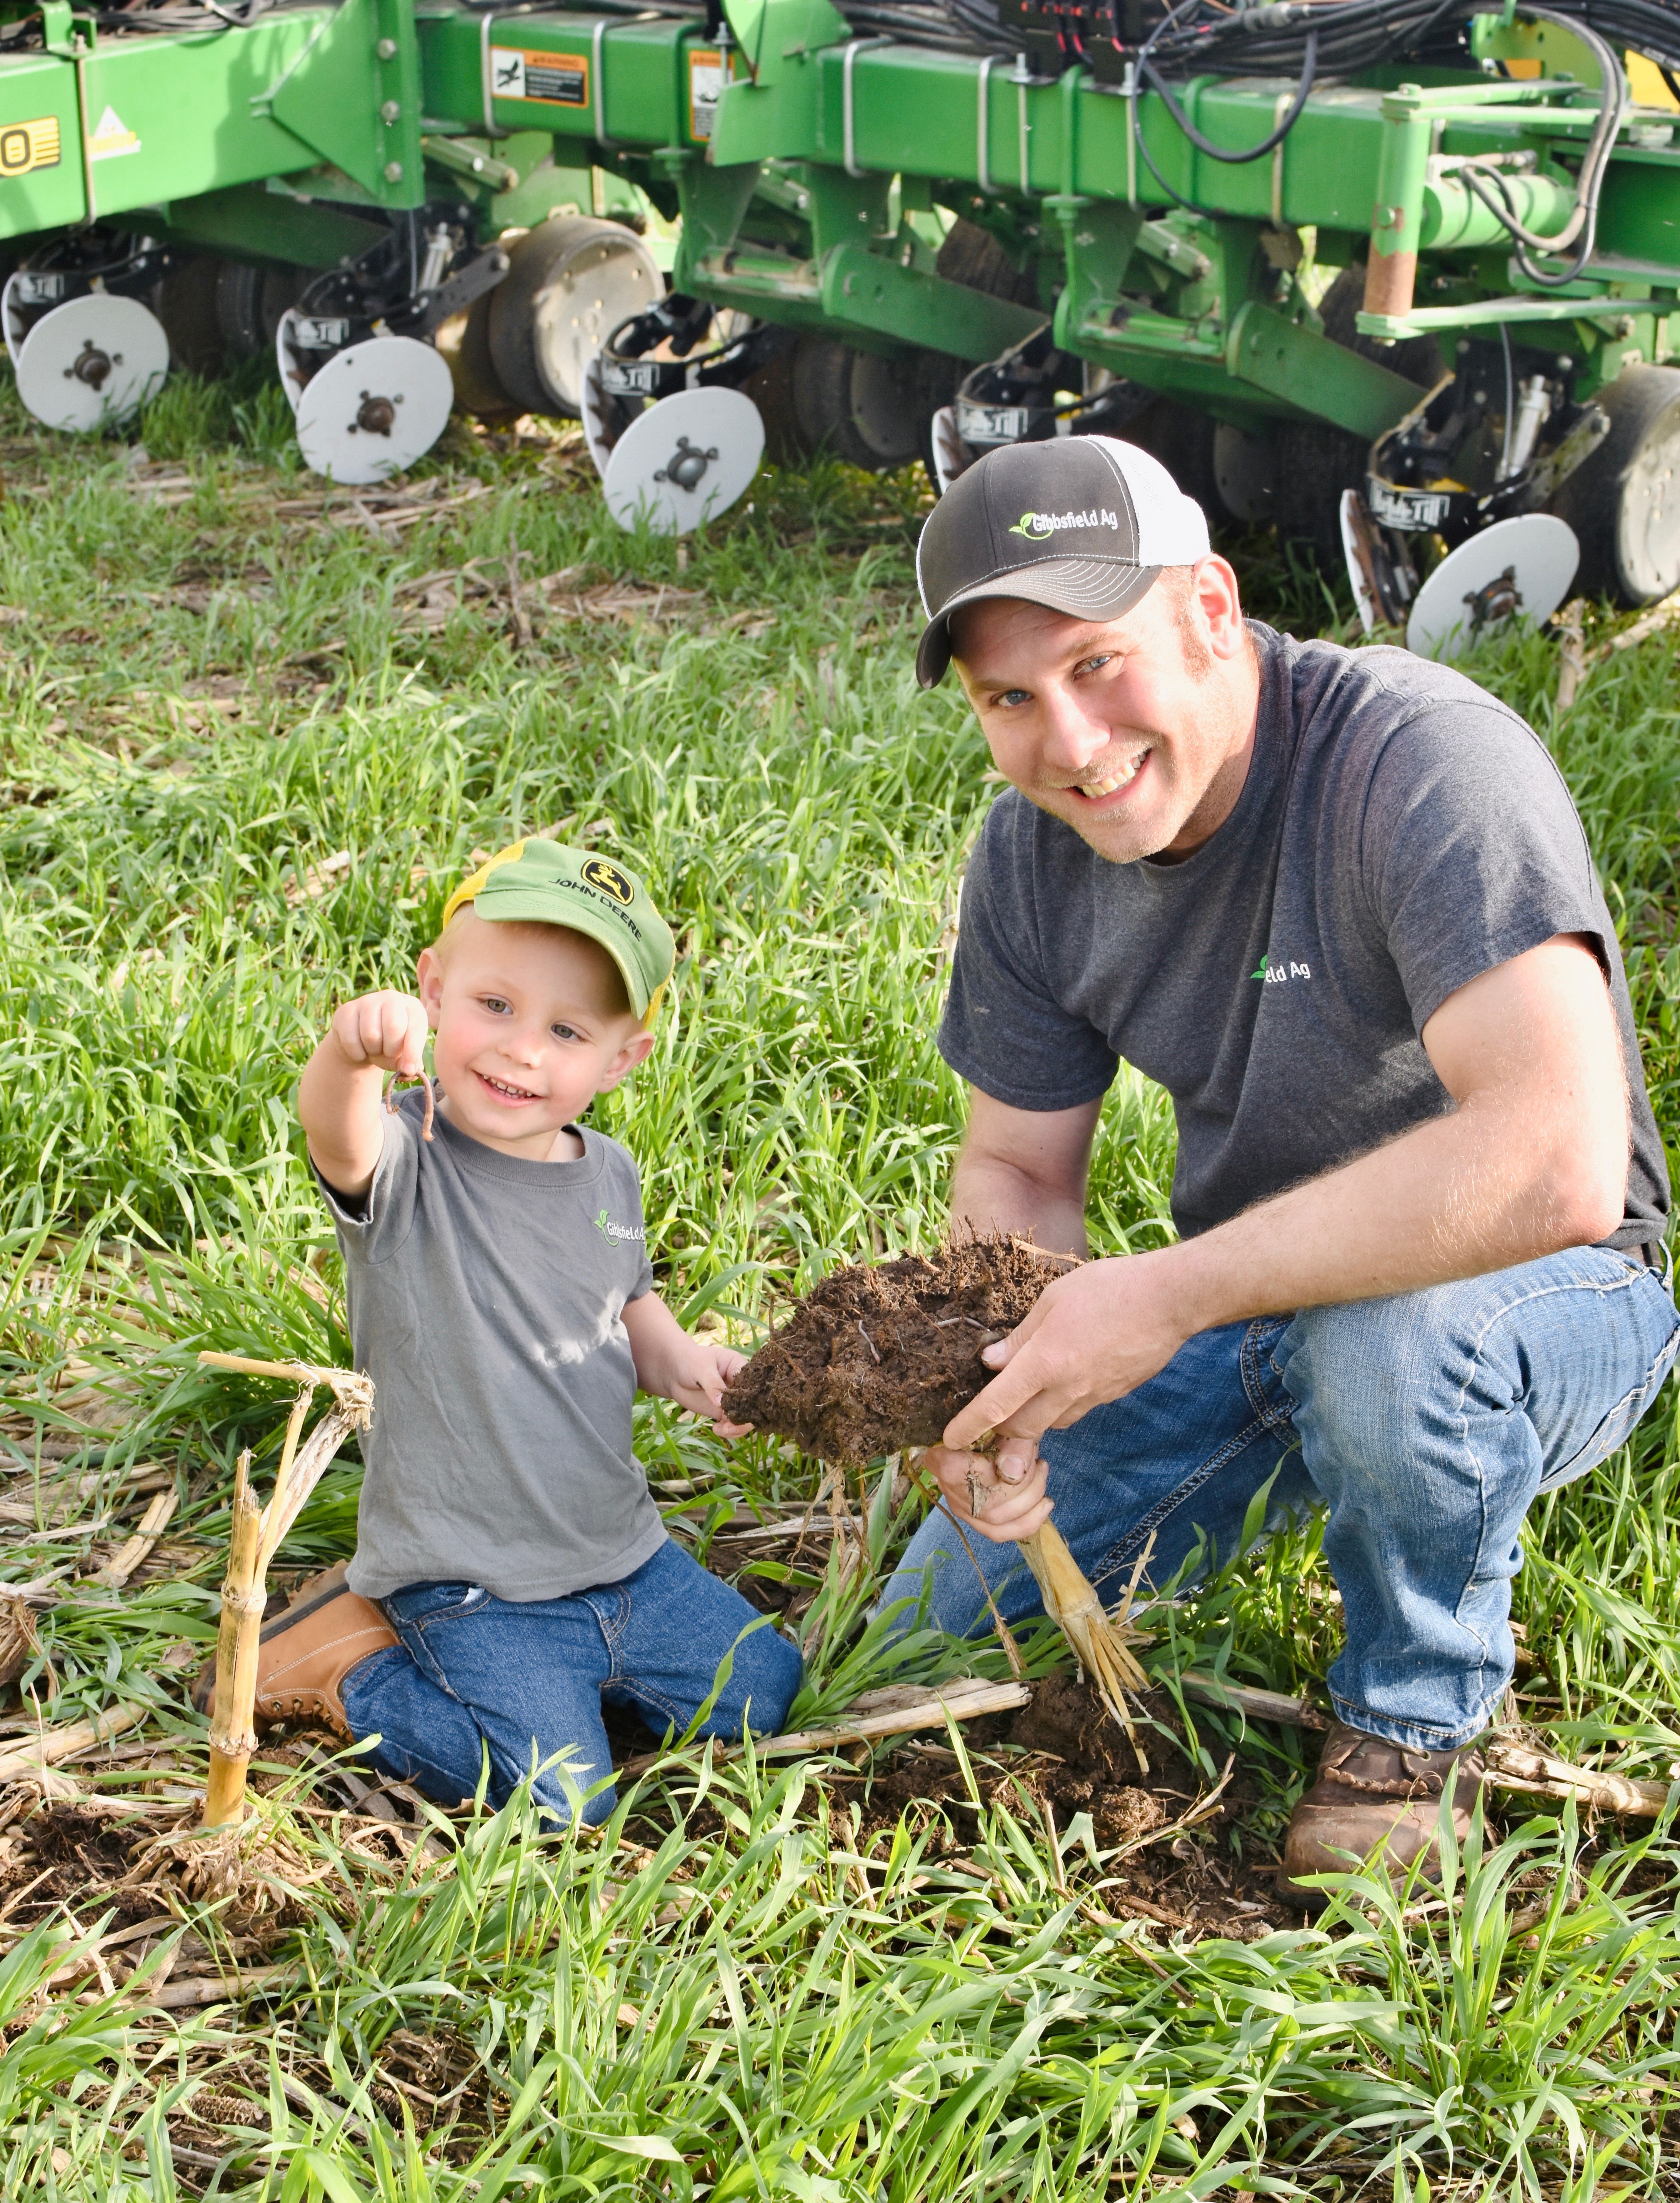 Kendrick poses with a worm next to his dad in a field of cover crops